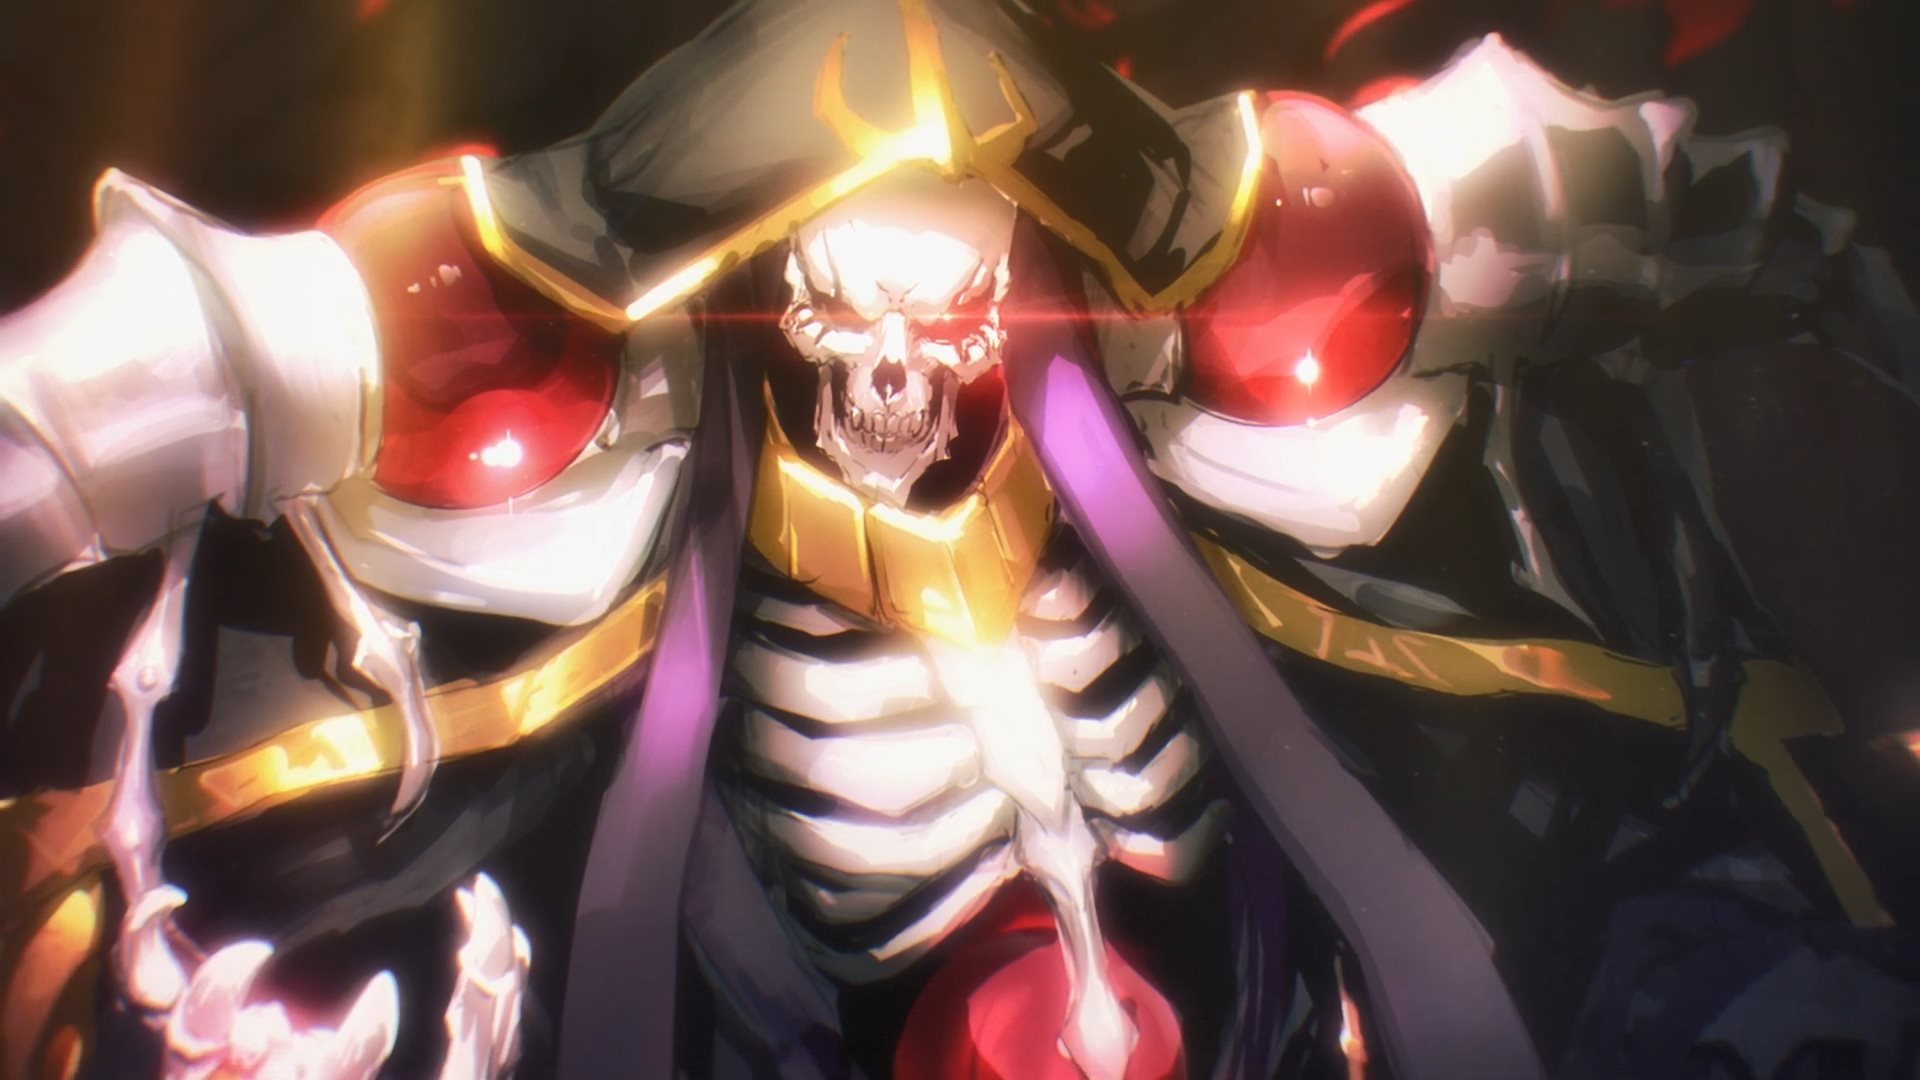 Overlord Season 4 Releases Non-Credit Ending Featuring So-Bin's Art